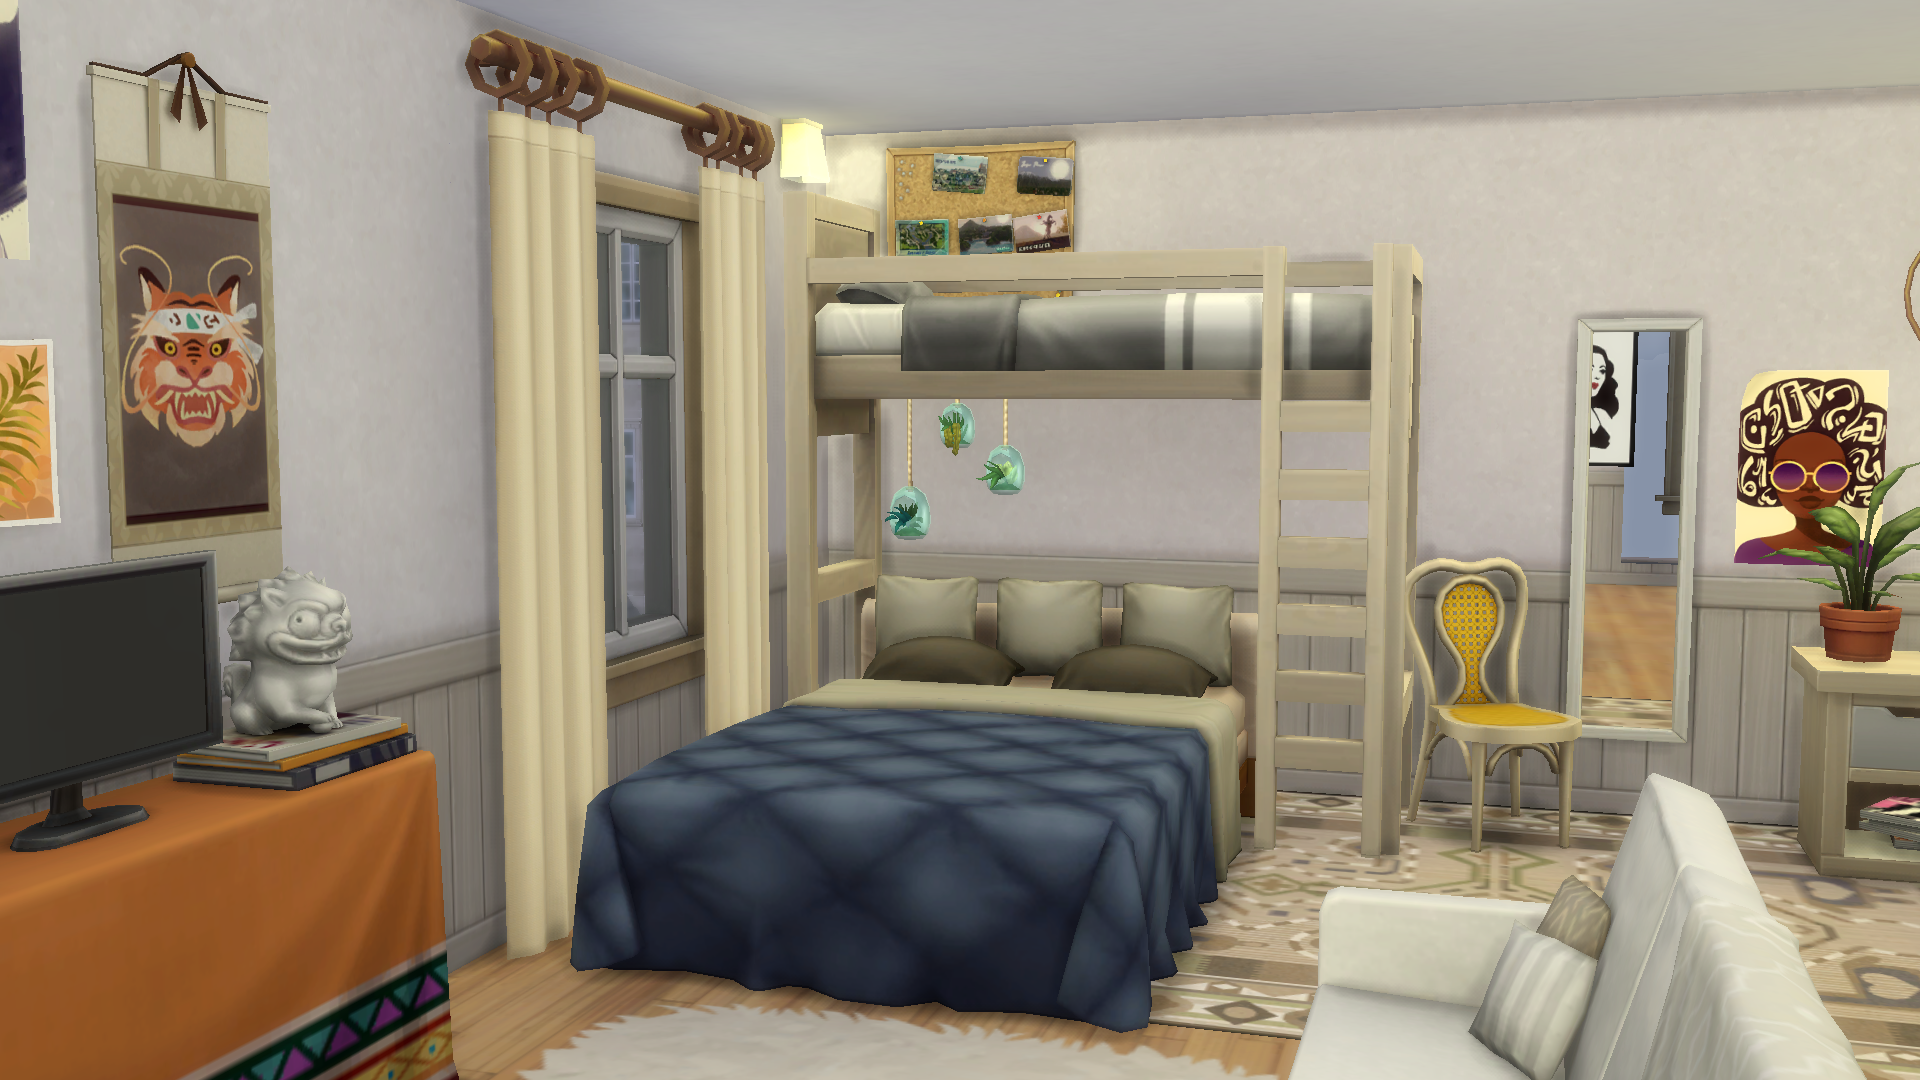 Building With Bunk Beds In The Sims 4, How Do You Make Bunk Beds In Sims 4